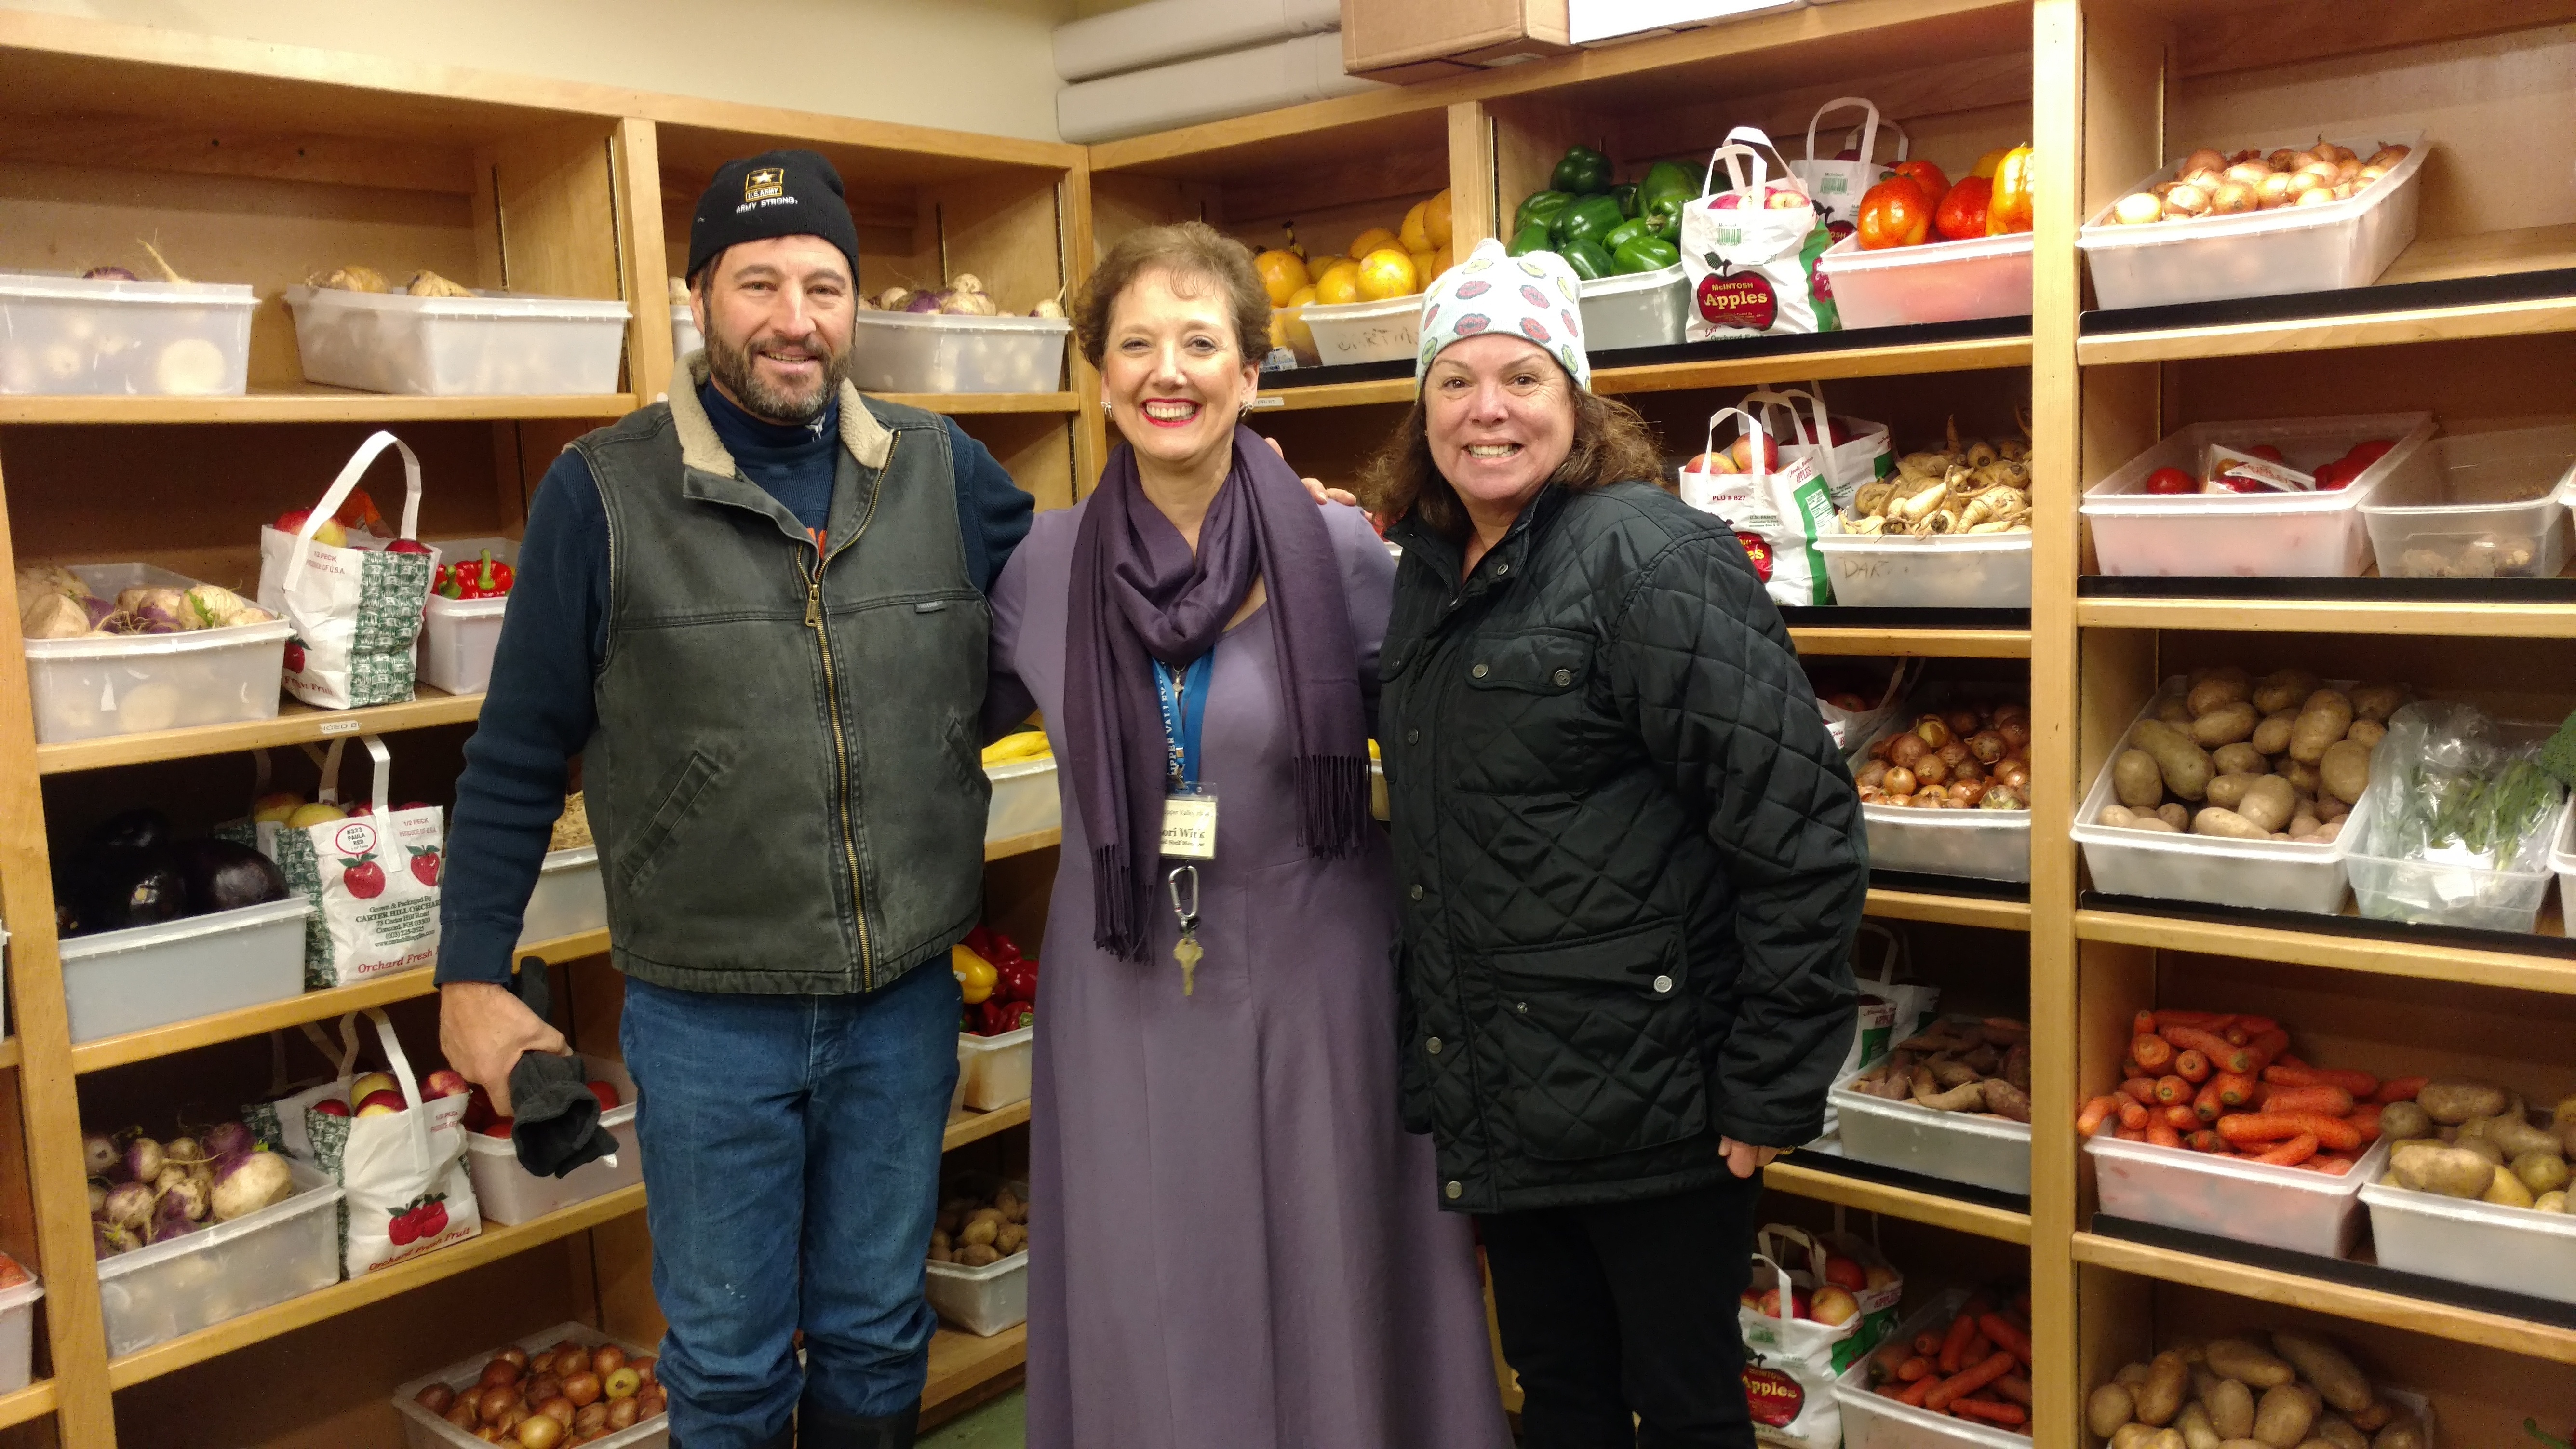 SymQuest Runs Interactive Campaign to Support Local Food Banks